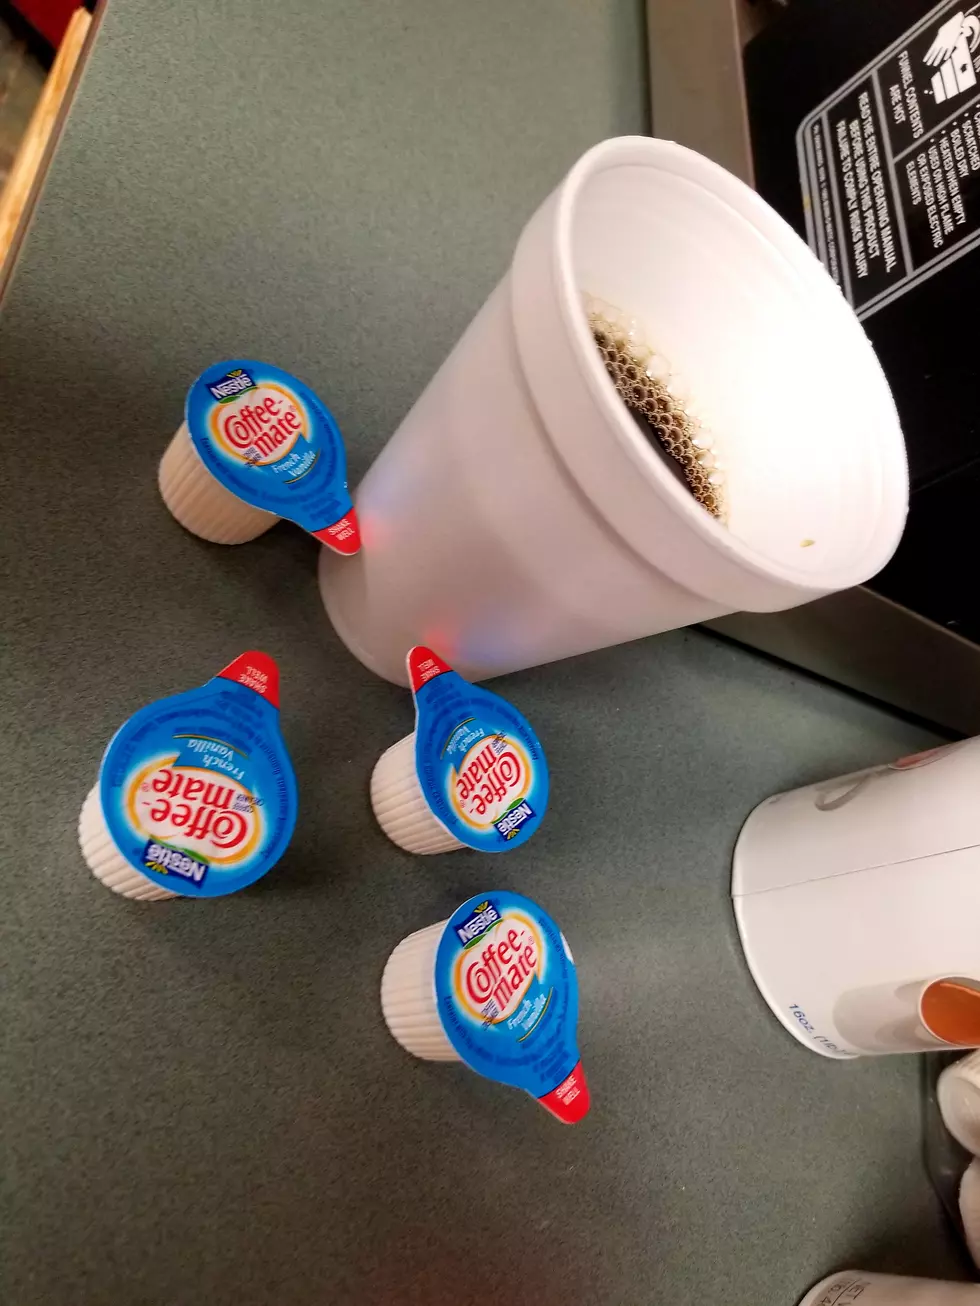 Want Some Coffee With Your Creamer?